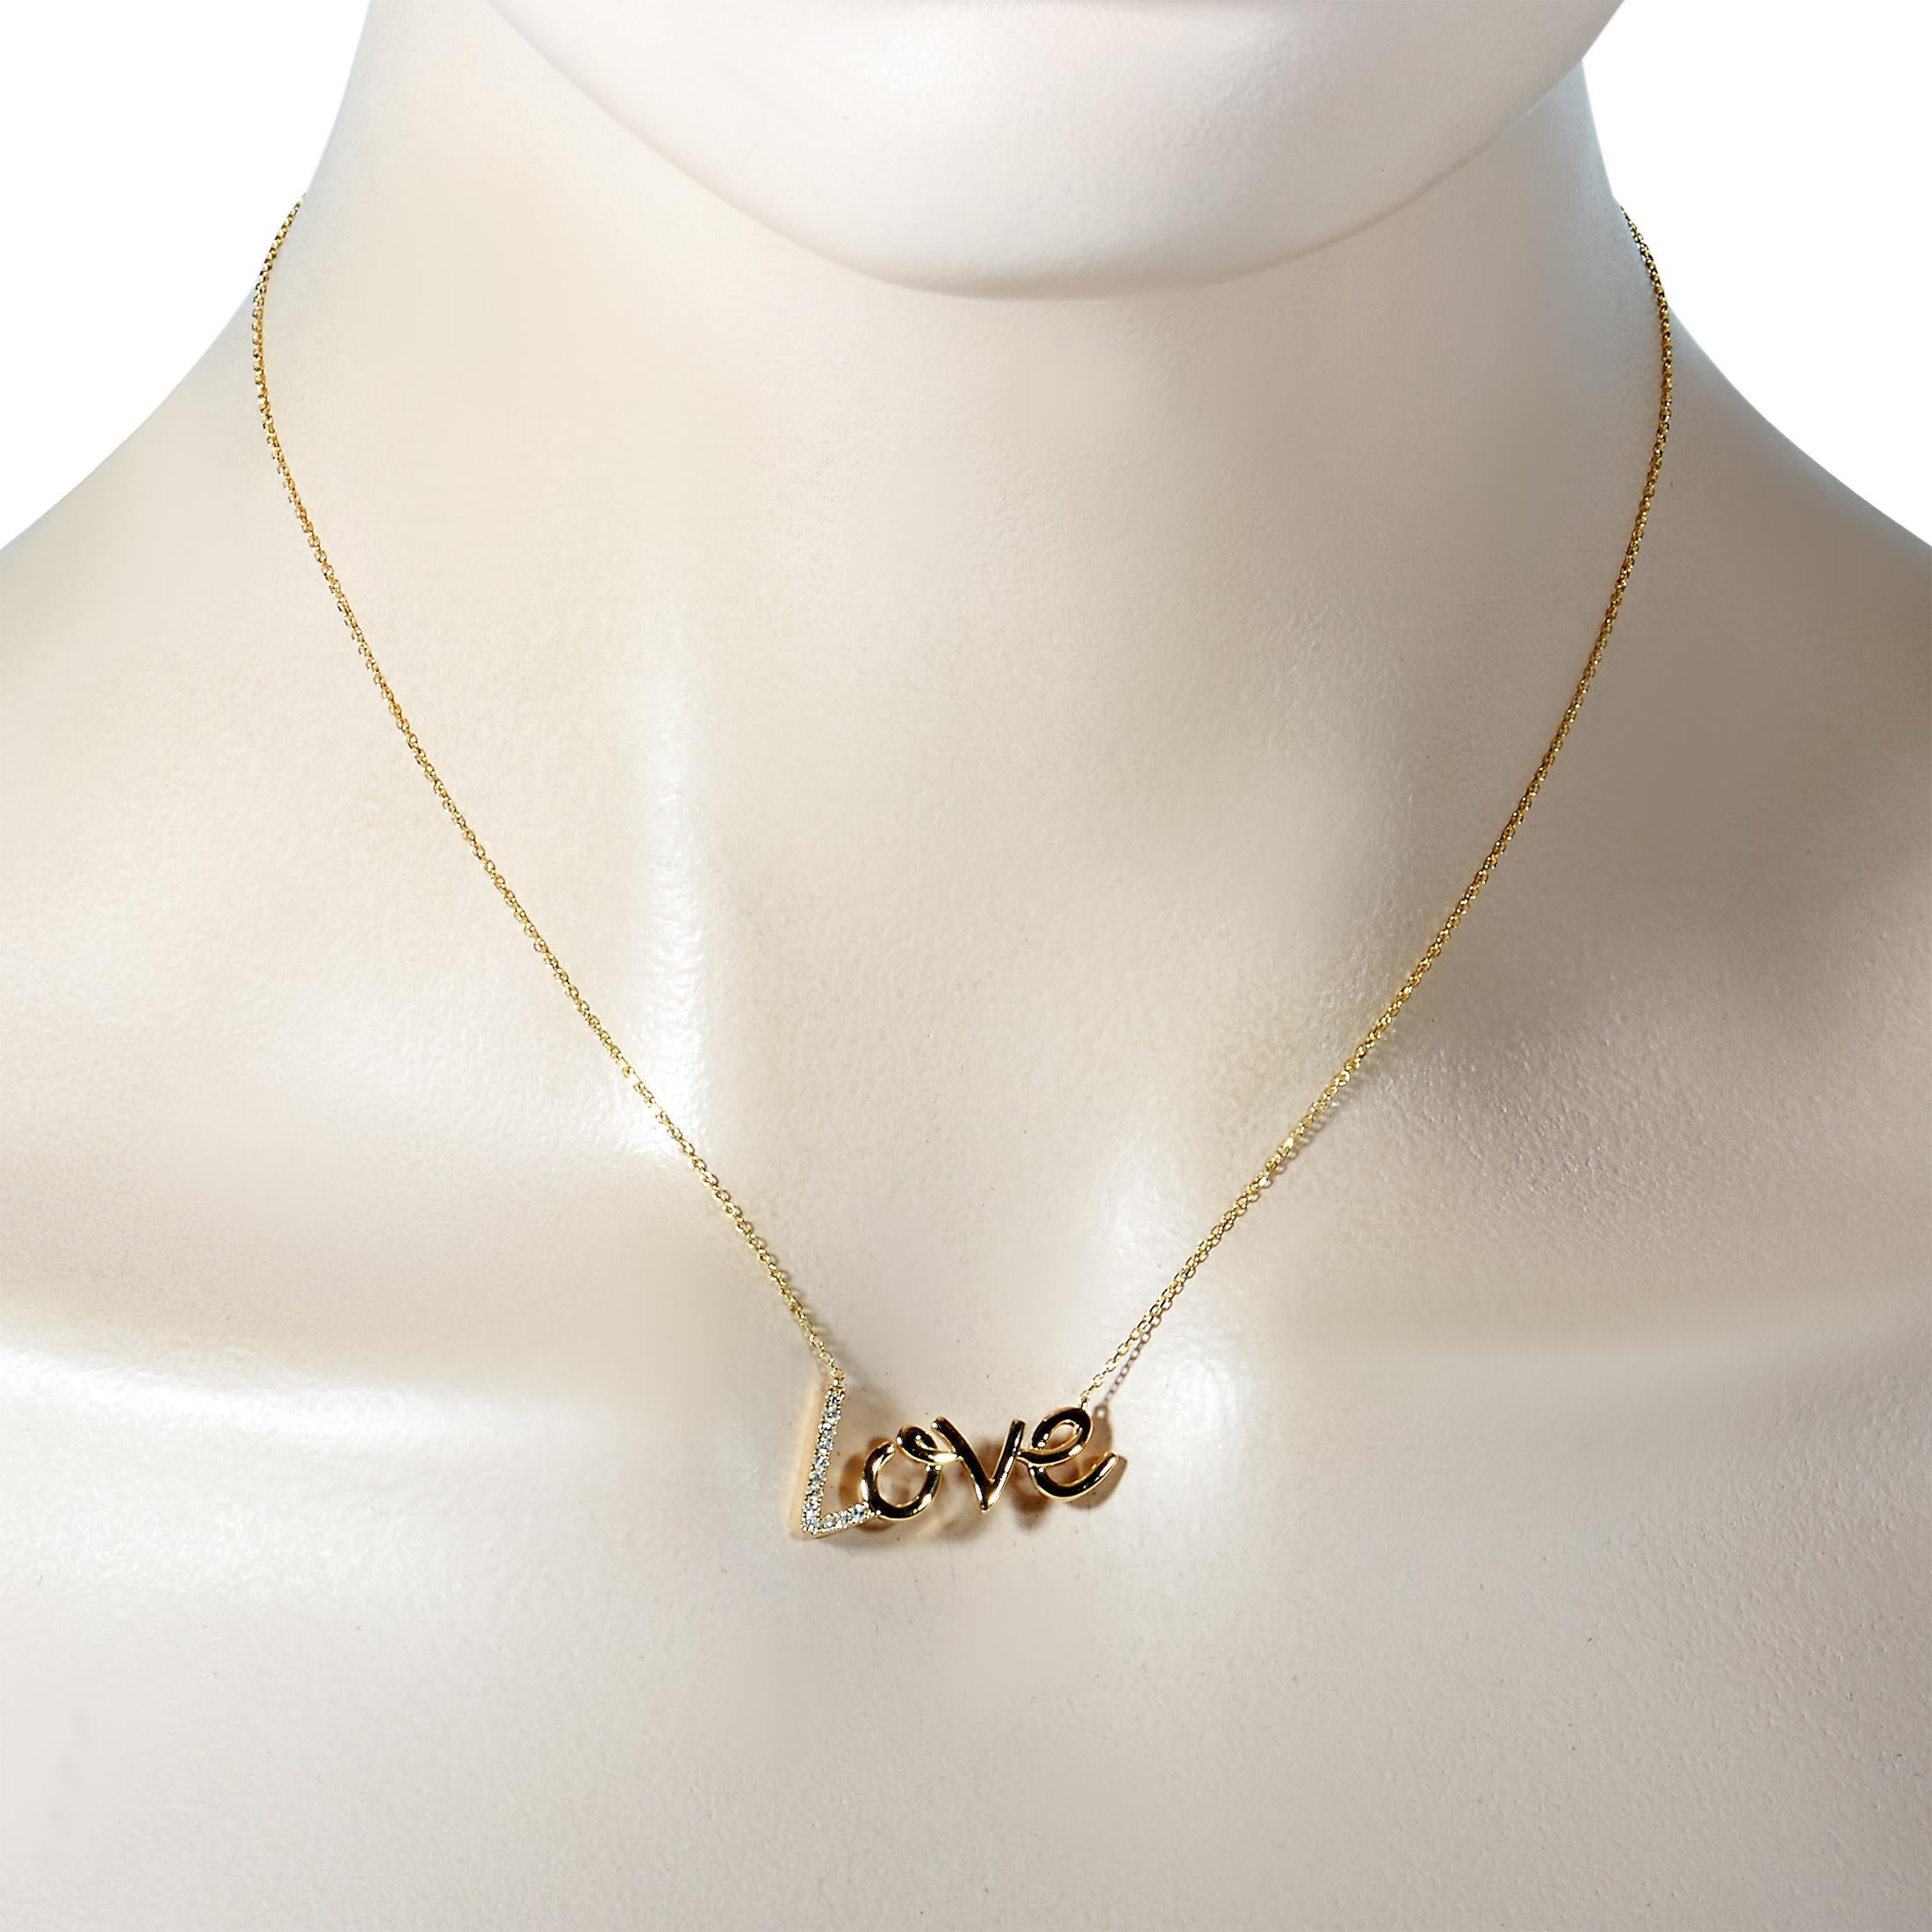 This LB Exclusive necklace is made of 14K yellow gold and embellished with diamonds that amount to 0.10 carats. The necklace weighs 3.1 grams and boasts a 16” chain and a “love” pendant that measures 1” in length and 0.50” in width.
 
 Offered in